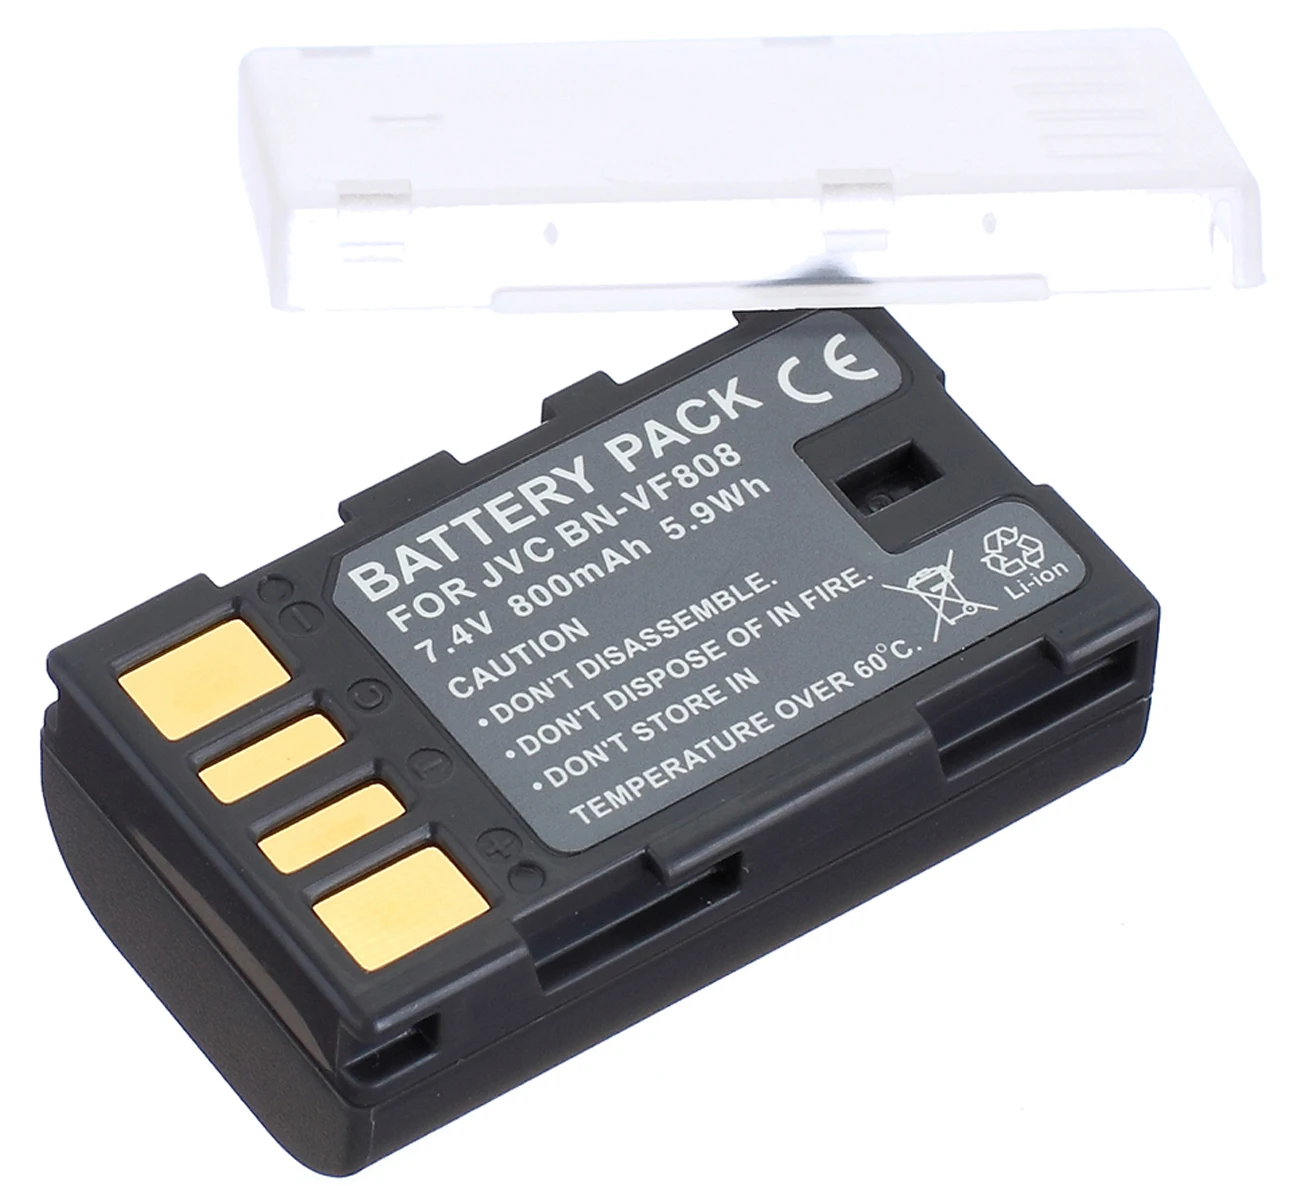 Kastar 2-Pack Battery and LTD2 USB Charger Replacement for JVC GZ-MG330 GZ-MG330A GZ-MG330AUS GZ-MG330B GZ-MG330H GZ-MG330HUS GZ-MG330R GZ-MG330RUS GZ-MG330S GZ-MG330US GZ-MG335 GZ-MG335H GZ-MG335HUS 